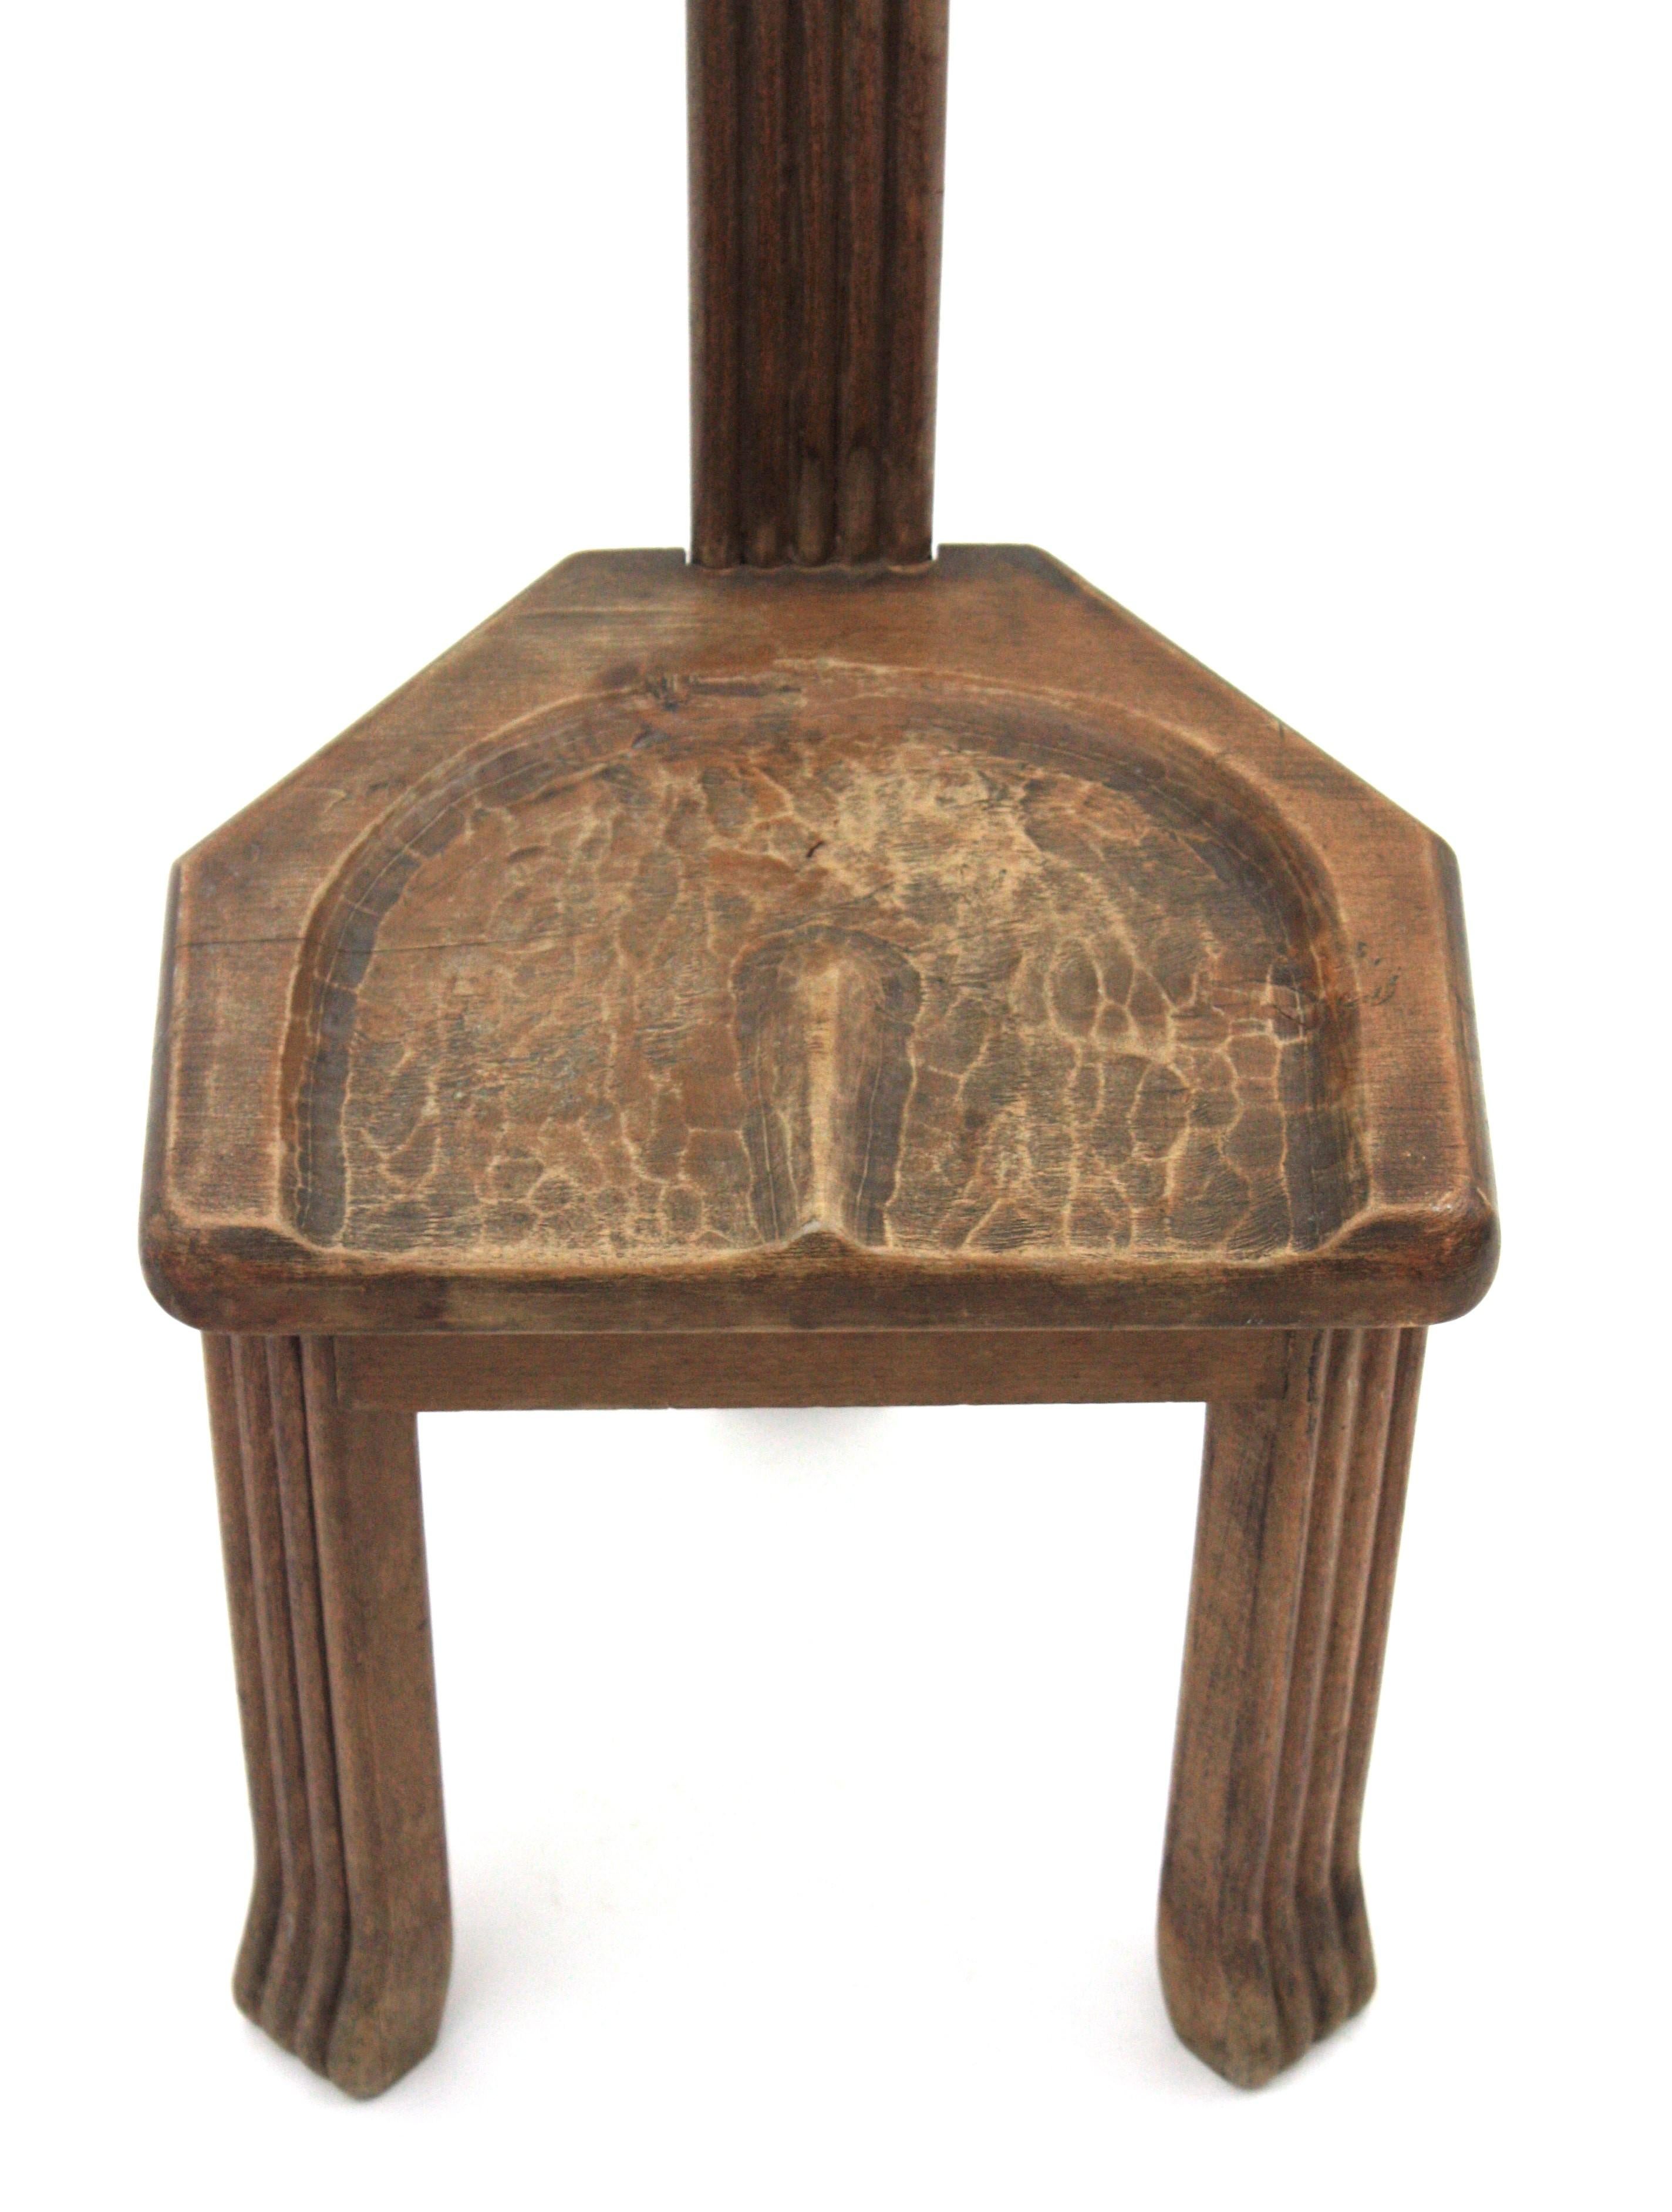 French Brutalist Wood Side Table Tripod Stool with High Backrest, 1950s For Sale 2